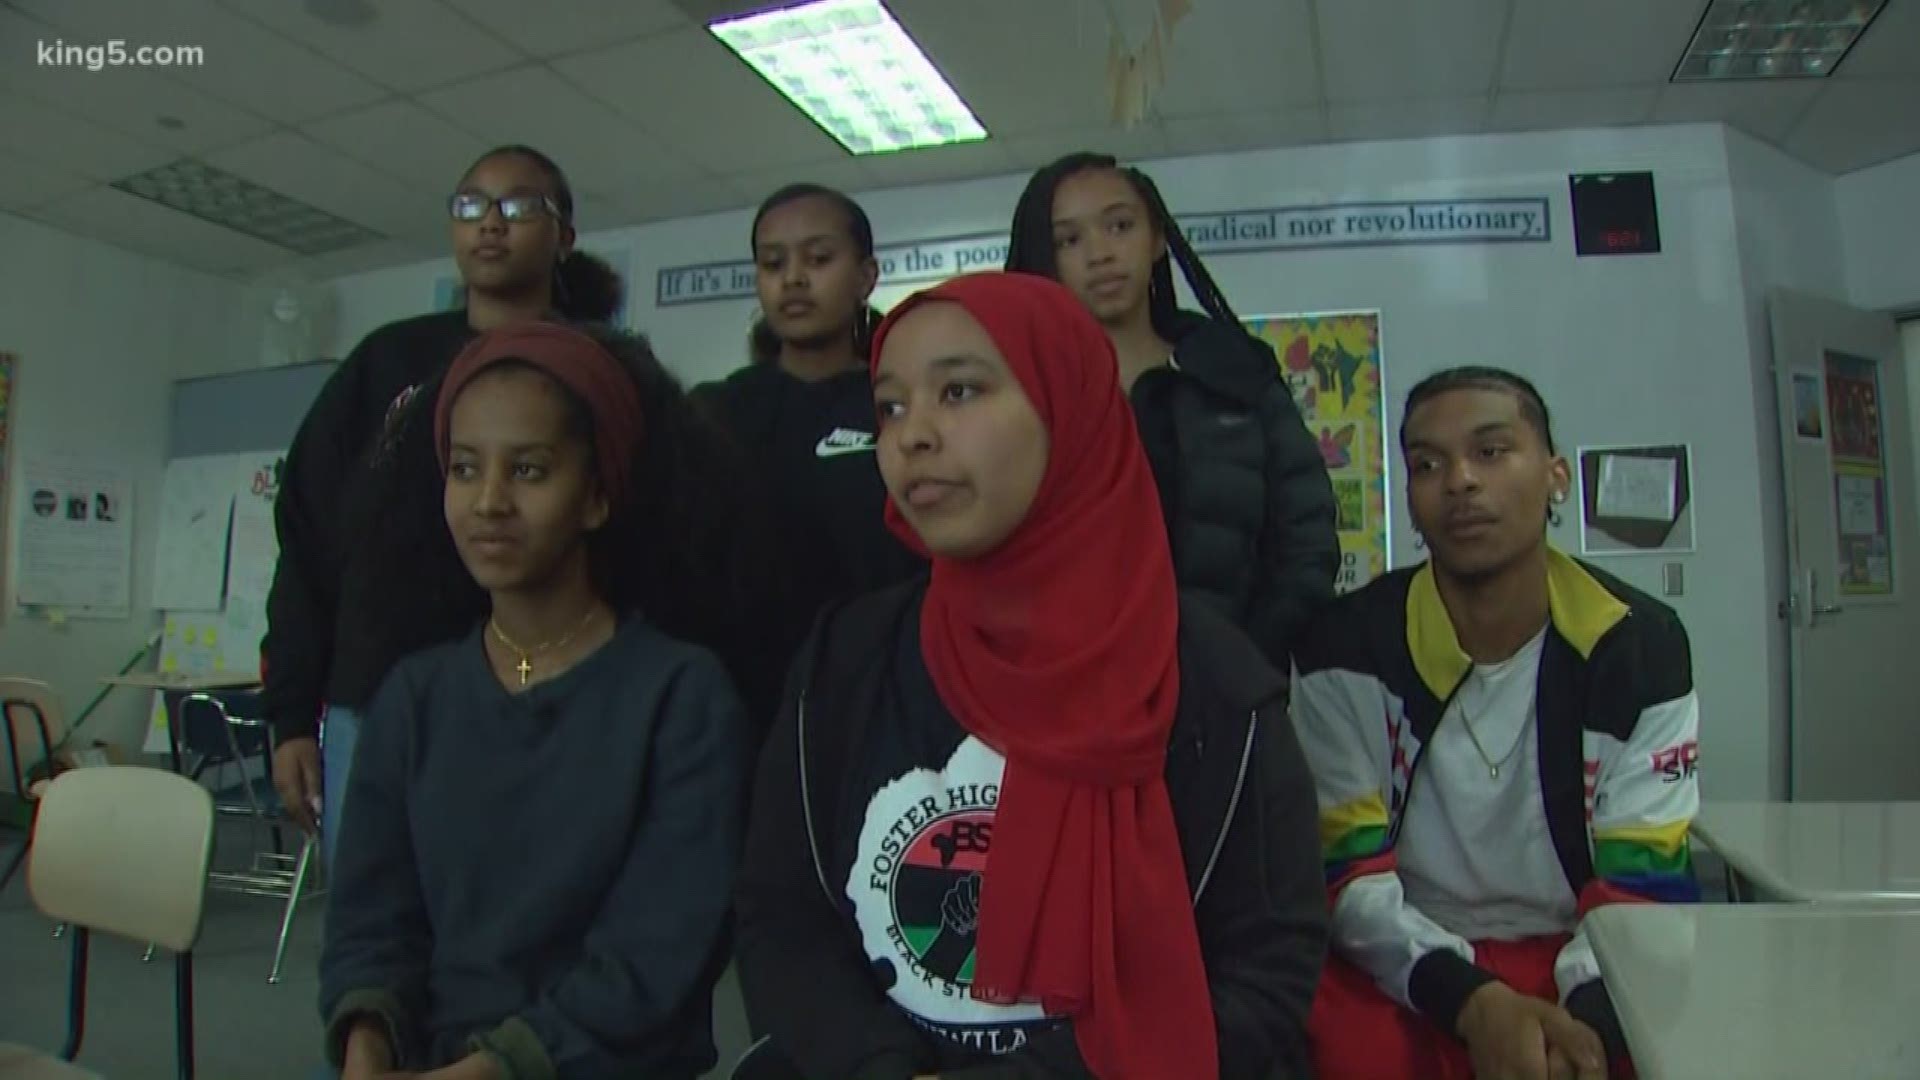 Students describe facing racist slurs on a regular basis at Foster High School in Tukwila. And they say school administrators are not taking action. KING 5's Natalie Swaby was there as they confronted the school board.